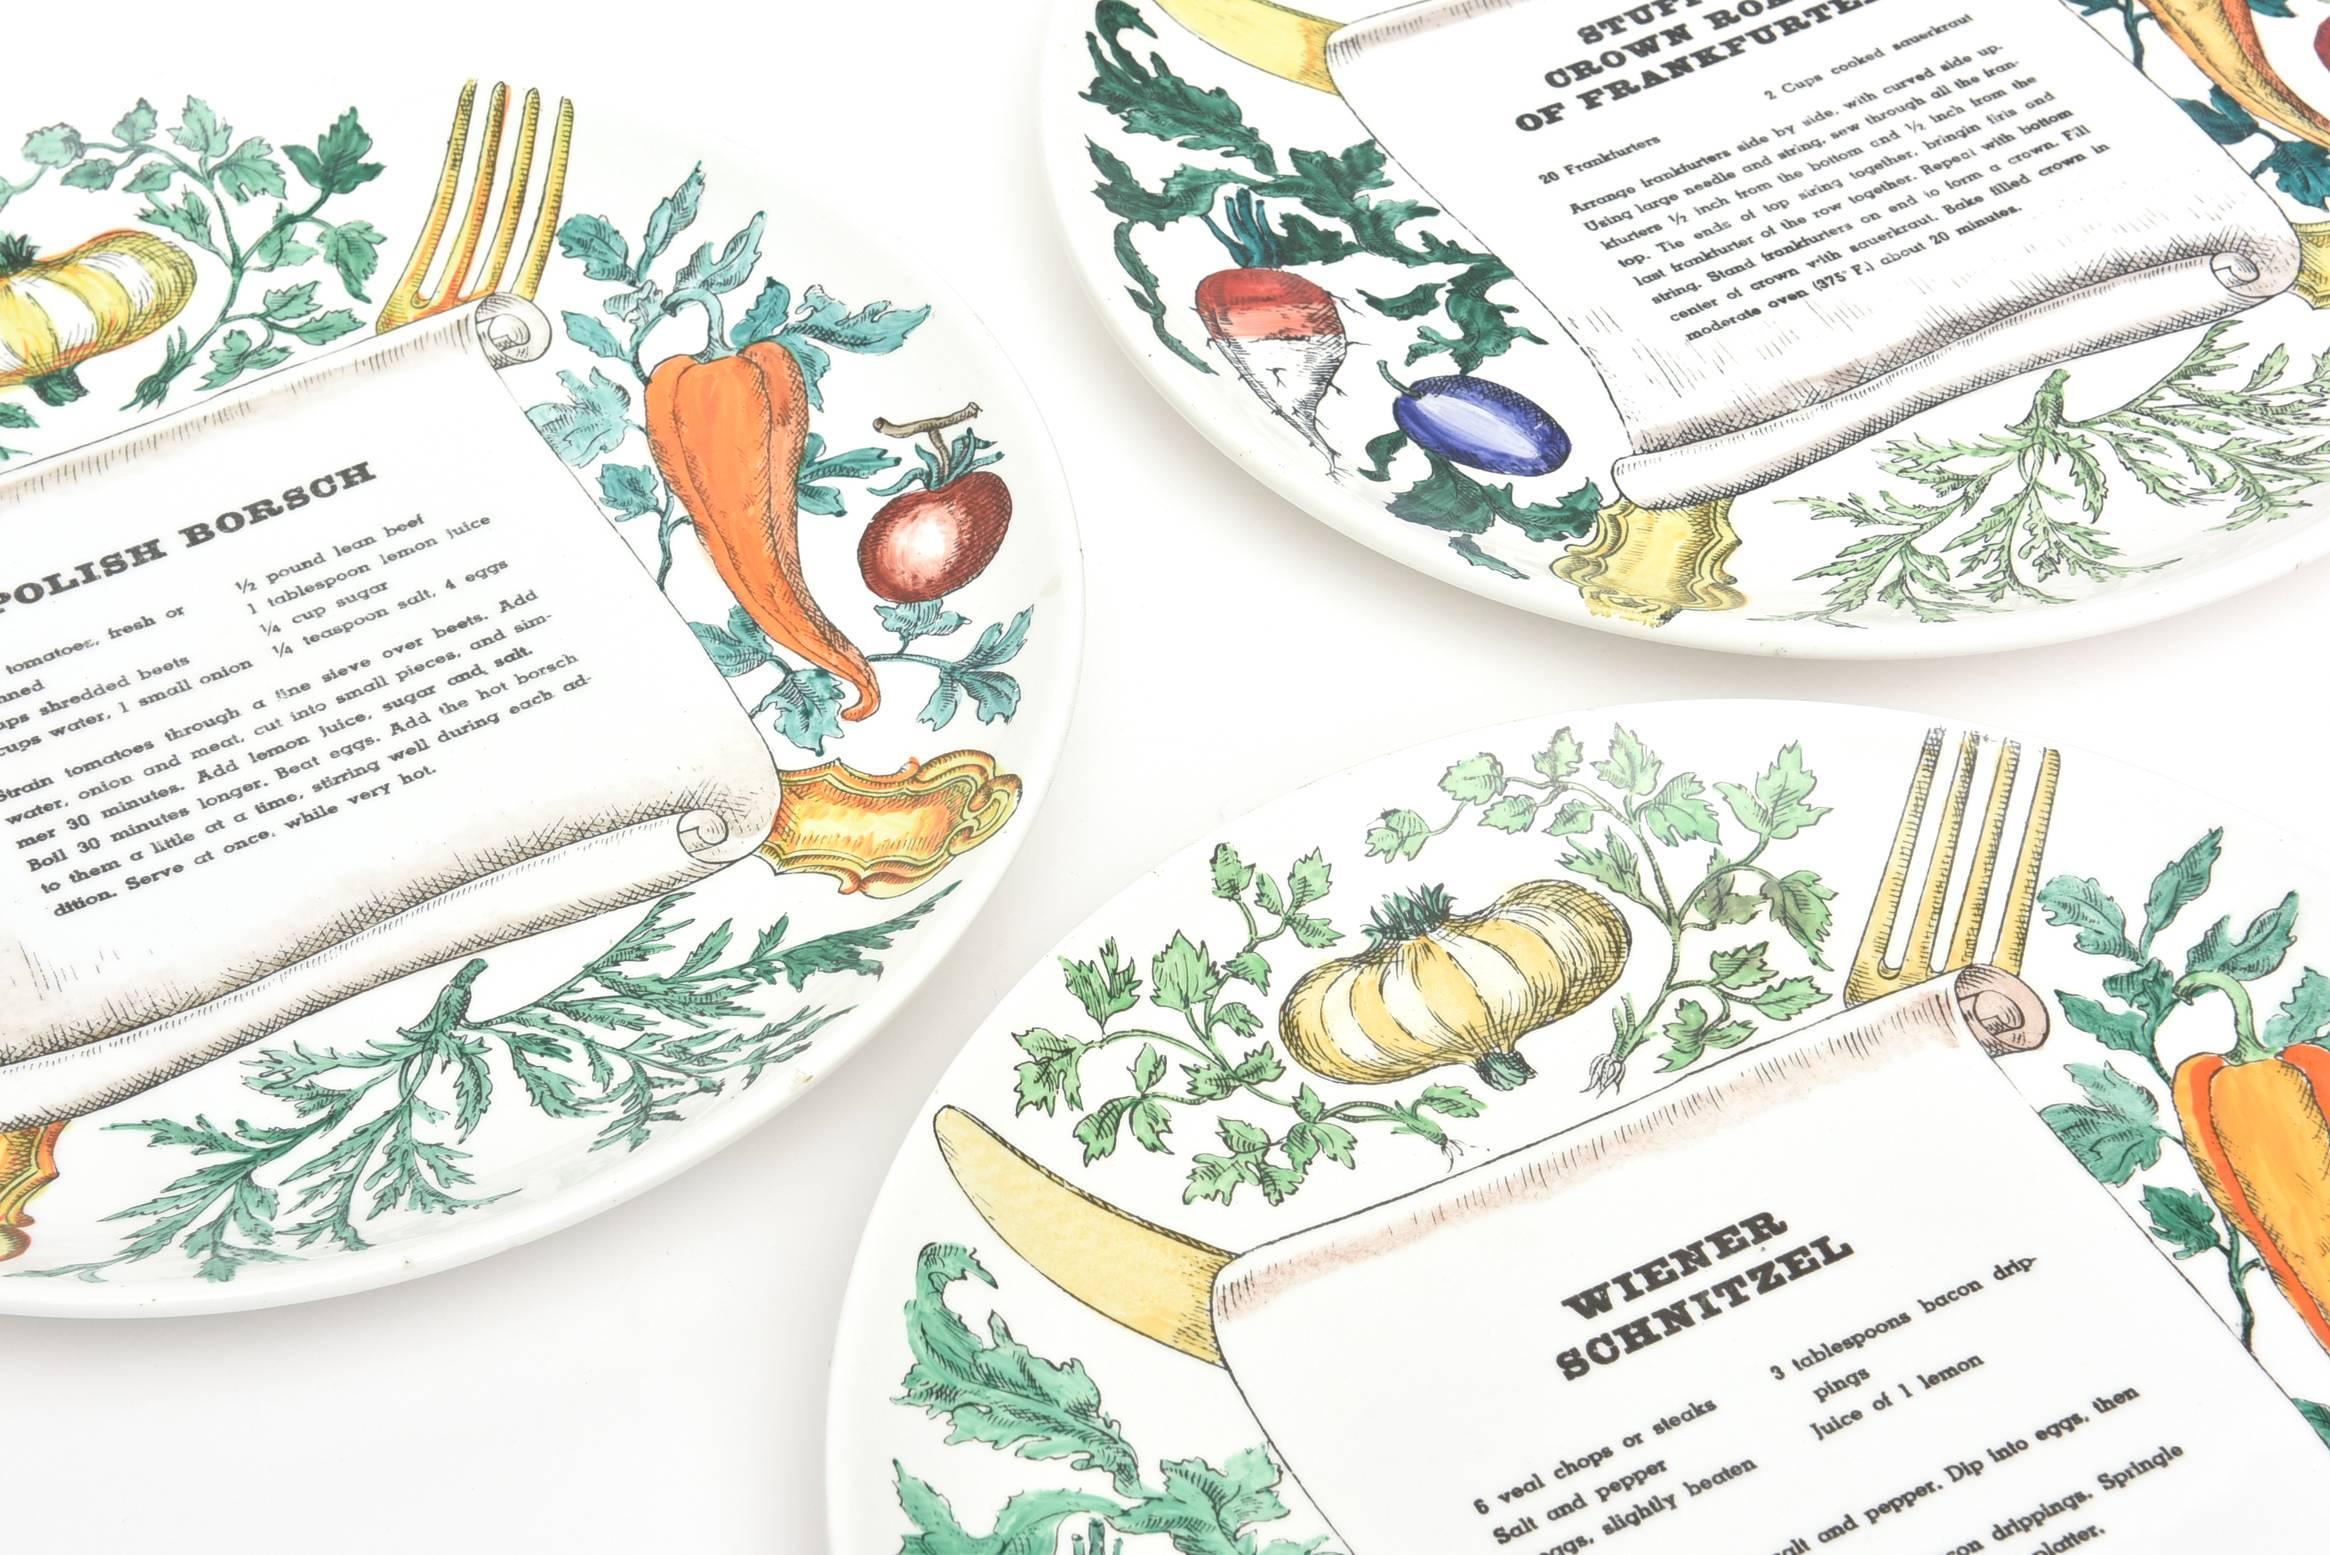 These delightful hallmarked set of three Italian Mid-Century Modern Piero Fornasetti recipe plates are amusing and unusual. One is for stuffed crown roast or frankfurters, the other for wiener schnitzel, and the other for Polish Borsch. The